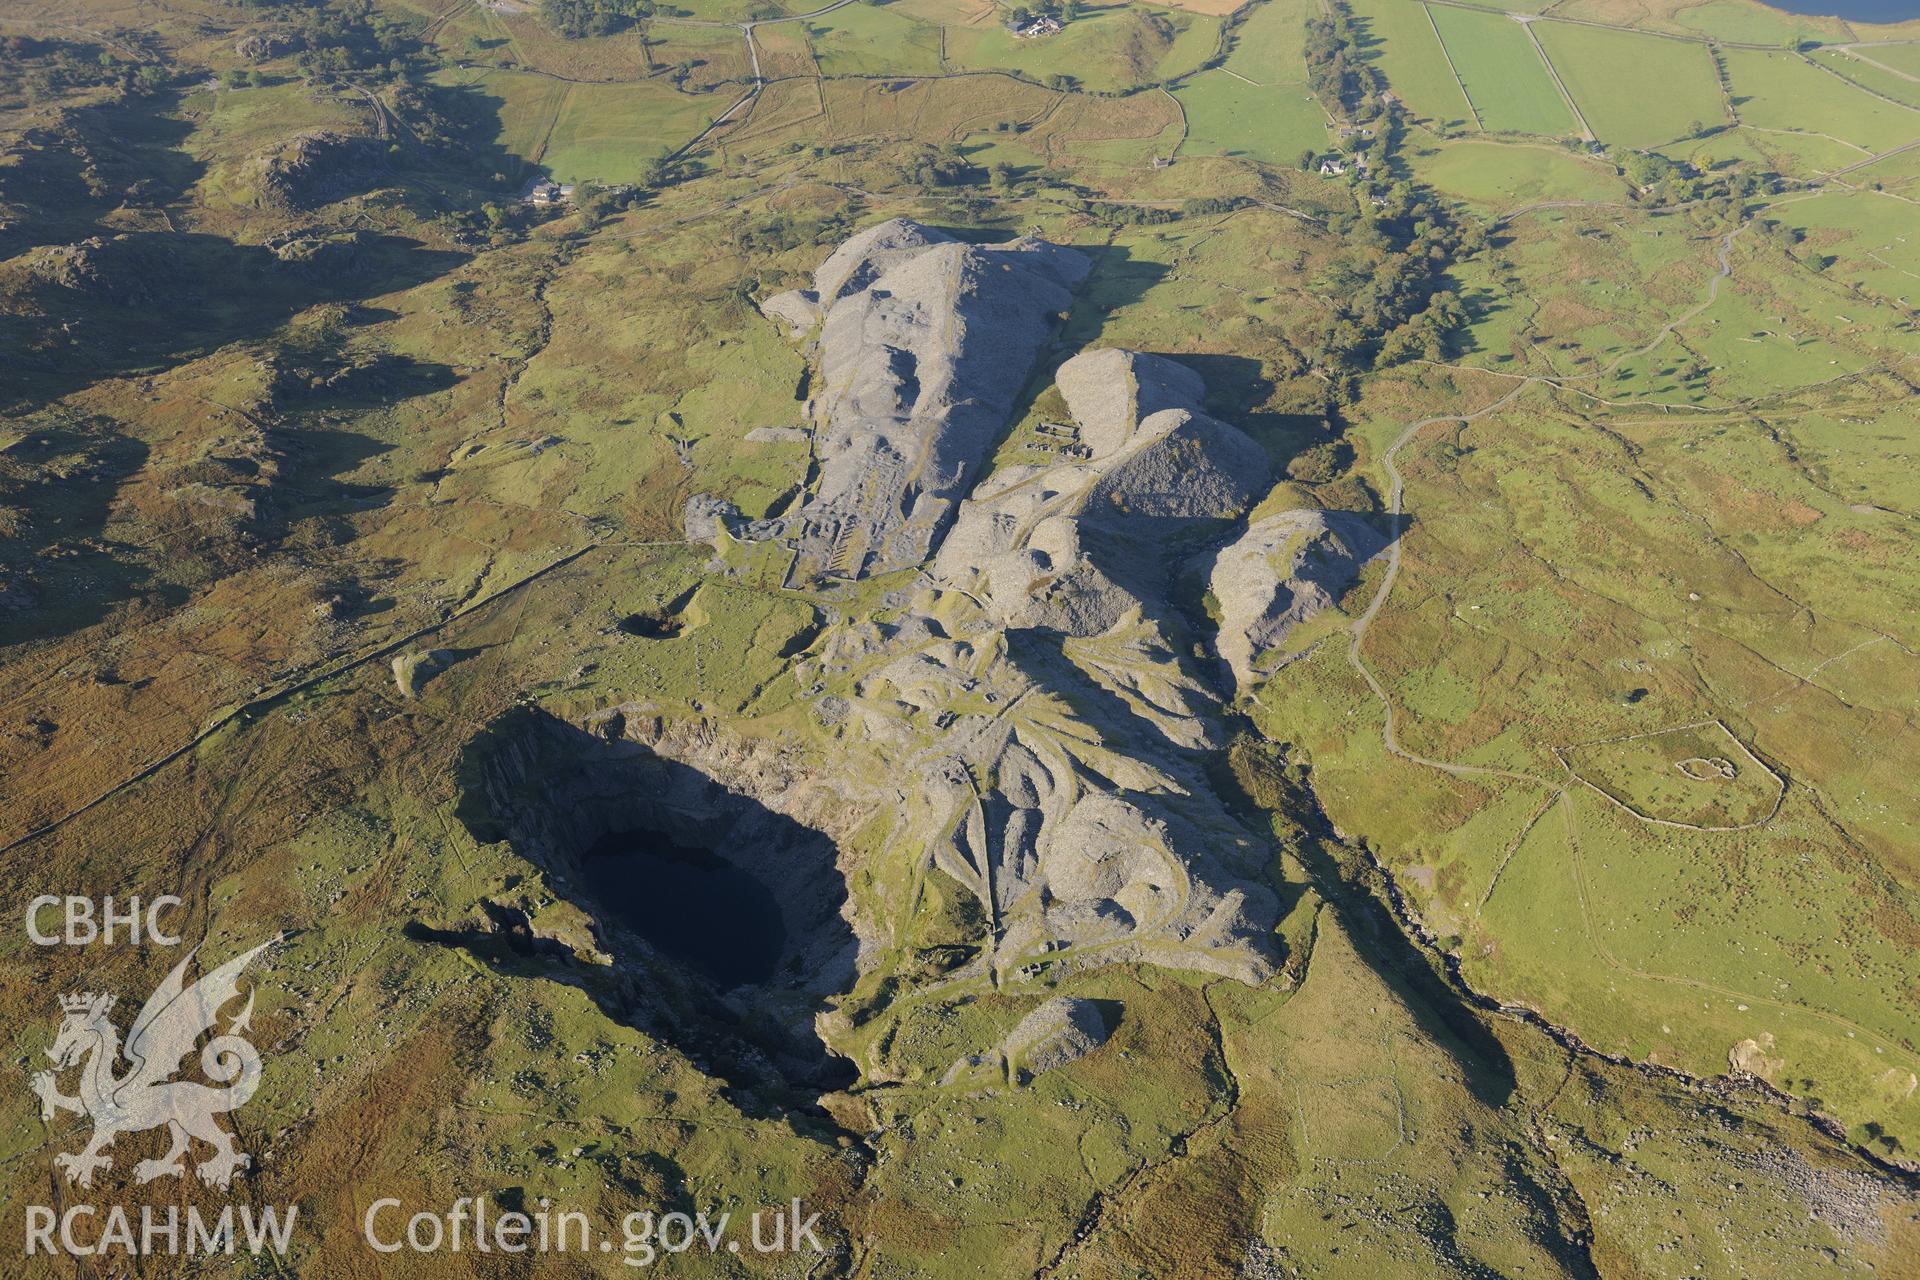 Barracks at Glanrafon slate quarry, near Capel Garmon. Oblique aerial photograph taken during the Royal Commission's programme of archaeological aerial reconnaissance by Toby Driver on 2nd October 2015.